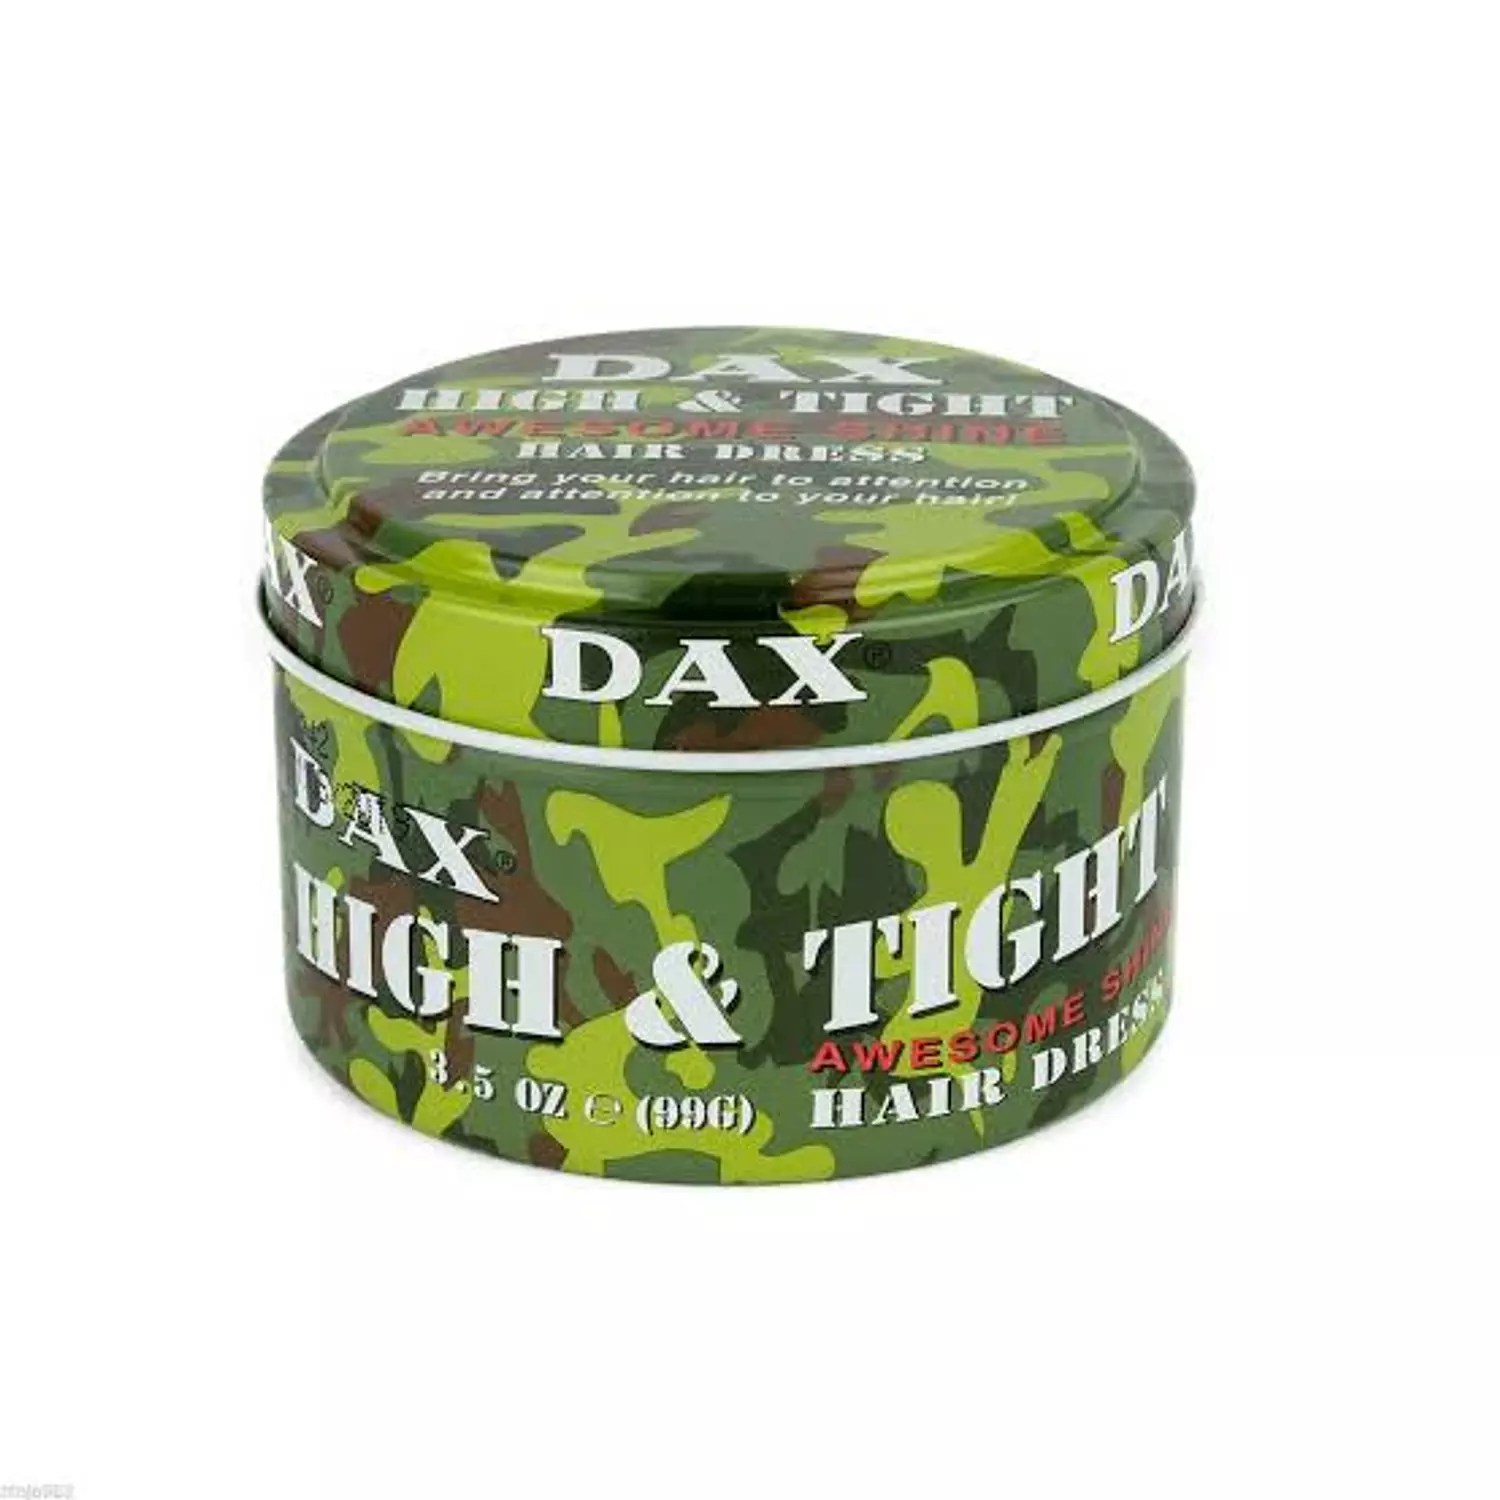 Dax Hair Wax High & Tight: Awesome Shine hover image